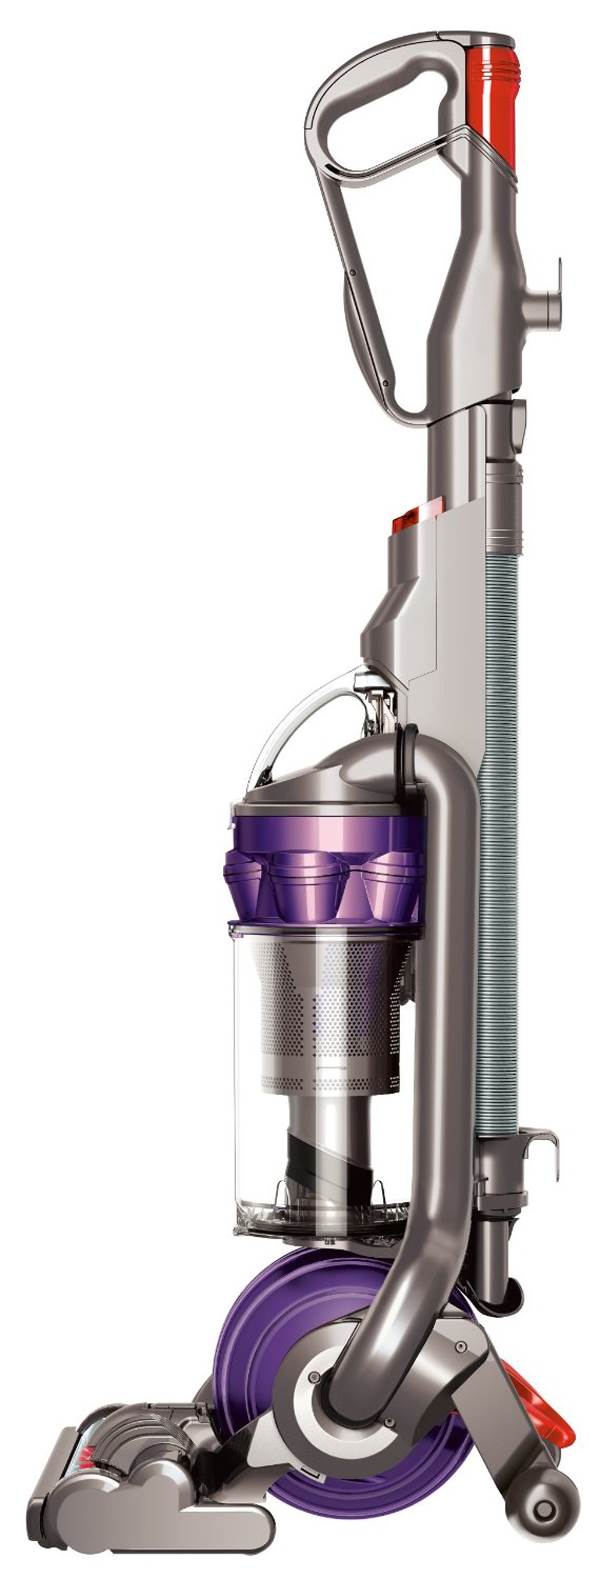 New Dyson 17418-01 DC25 The Ball Animal All-Floor Upright Bagless Vacuum Cleaner - image 1 of 12